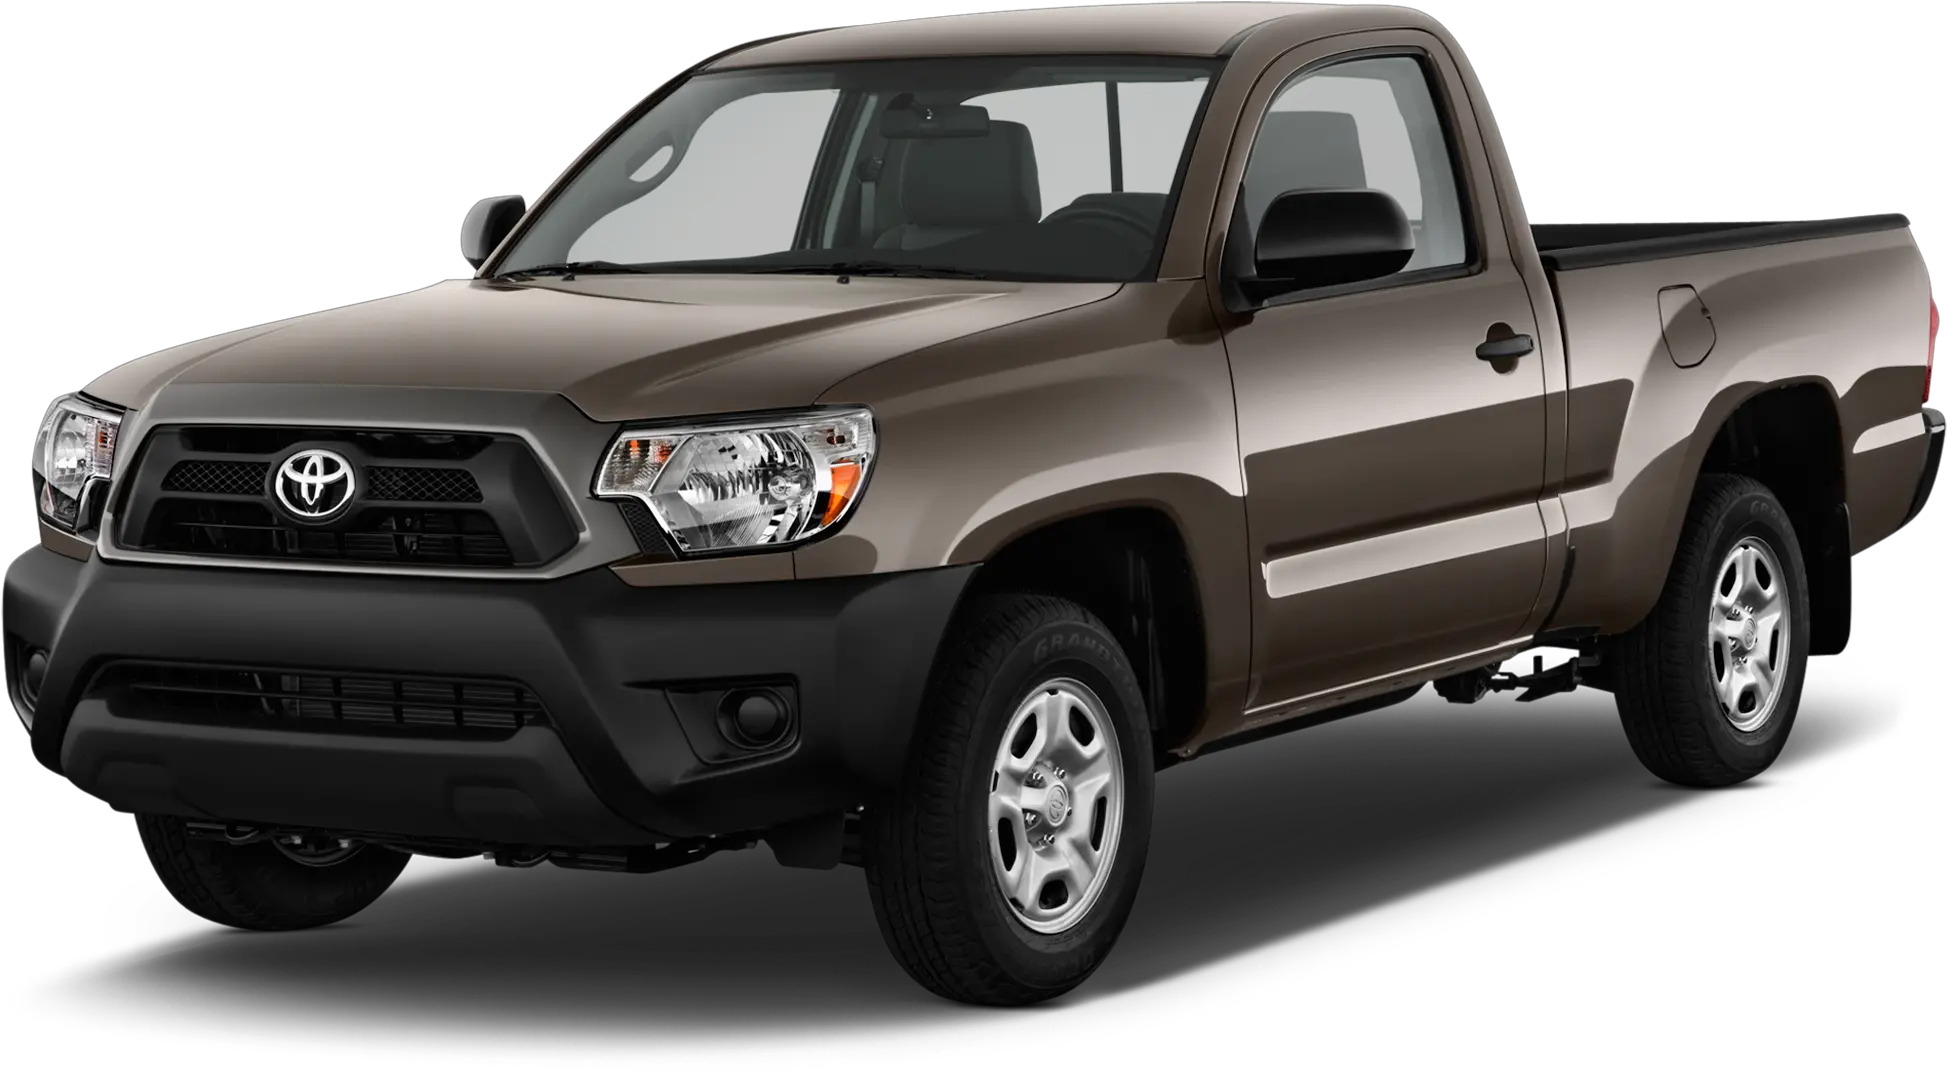 2013 Toyota Tacoma Buyeru0027s Guide Reviews Specs Comparisons 2013 Toyota Tacoma Png Cil Icon Grey